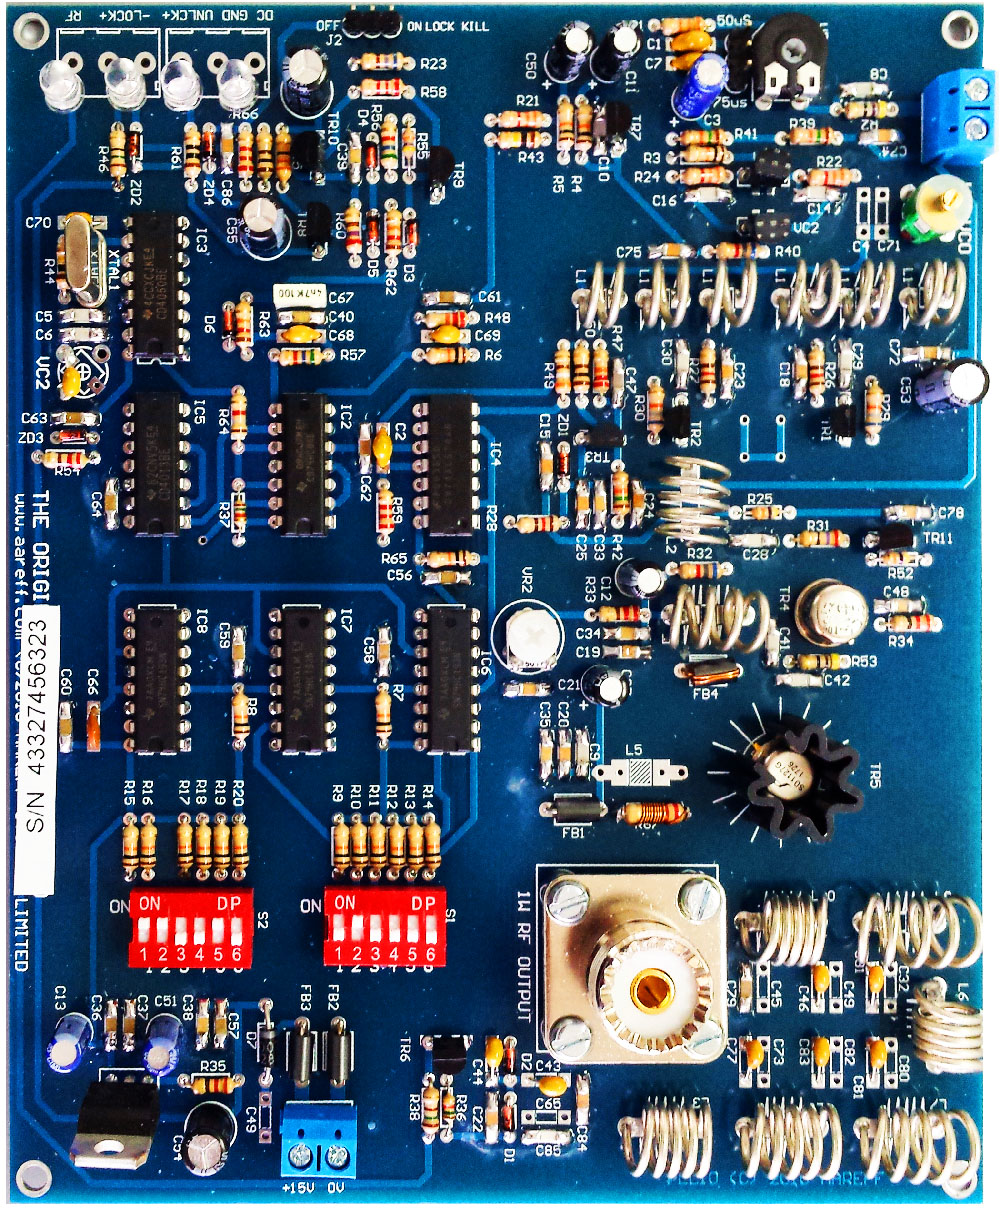 Aareff Veronica 1W PLL version 10 complete PCB layout with components fitted